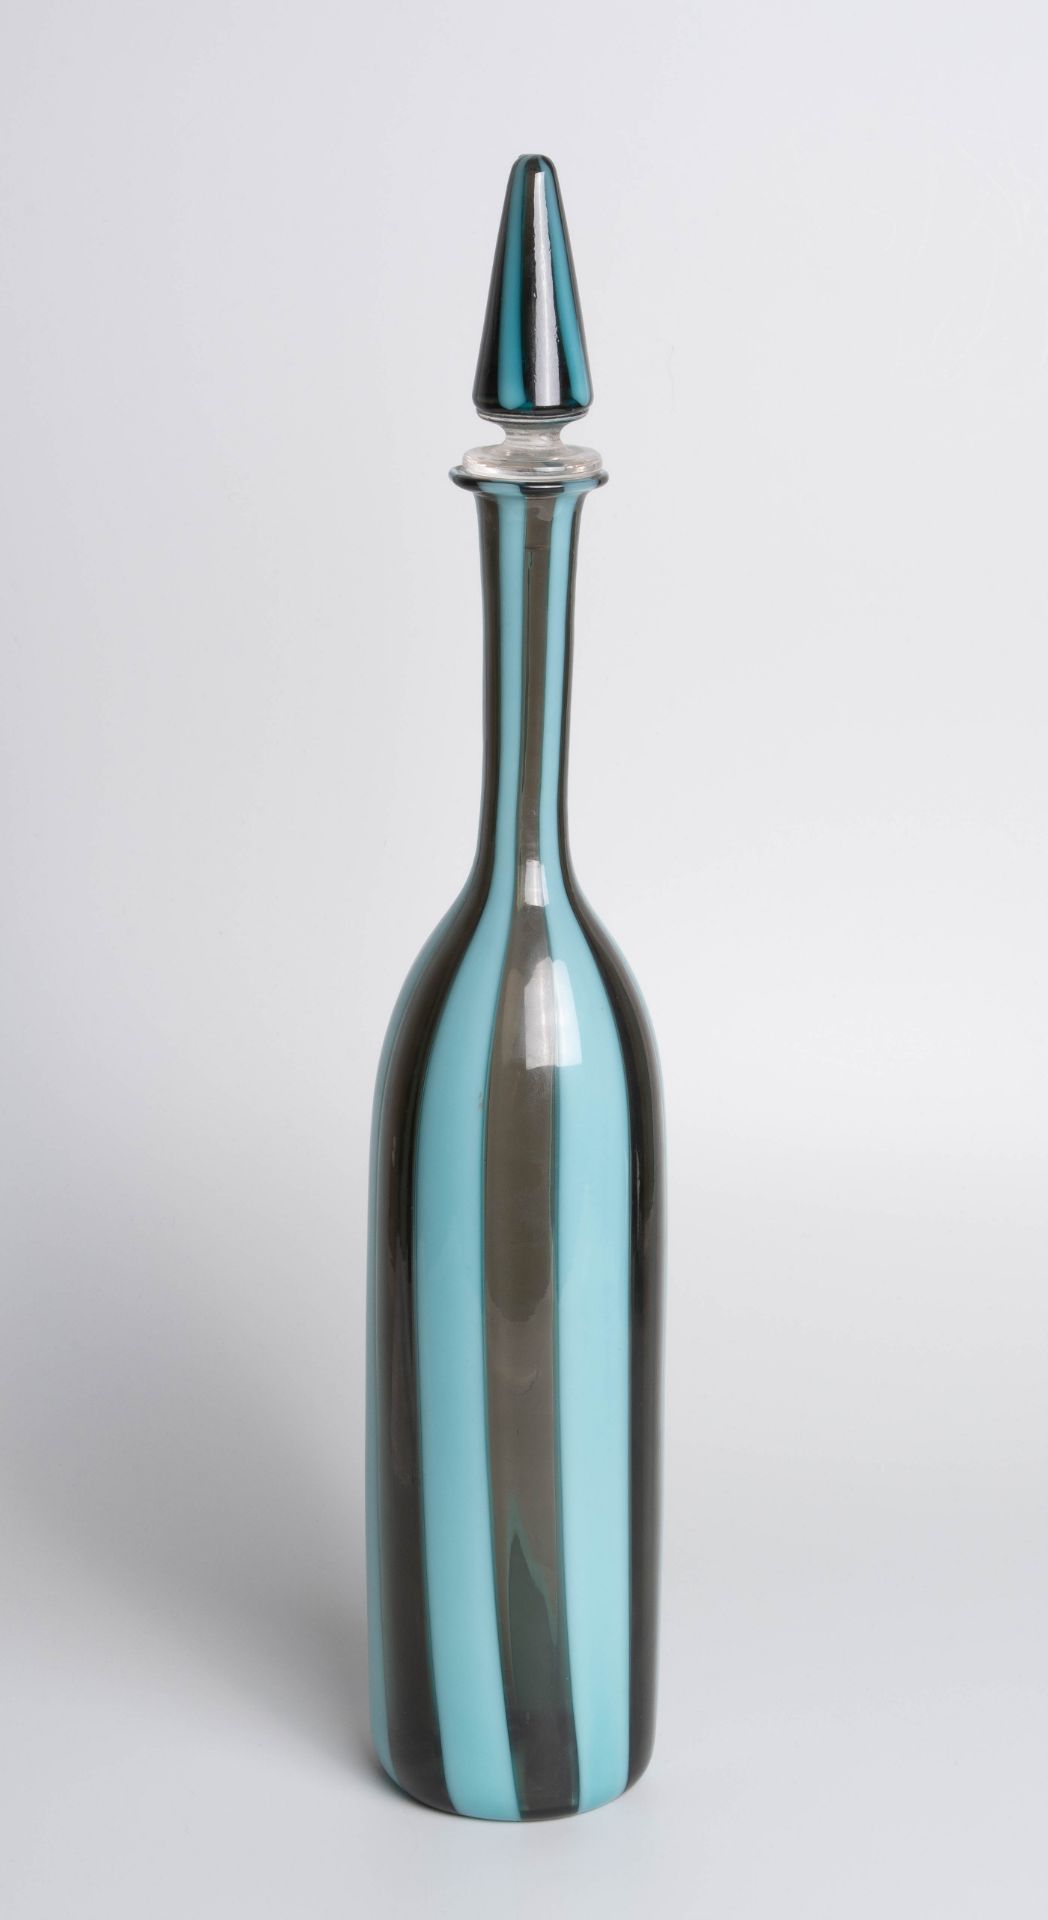 Paolo Venini, Flasche mit Stopfen "A canne, Modell 4497" - Image 2 of 9